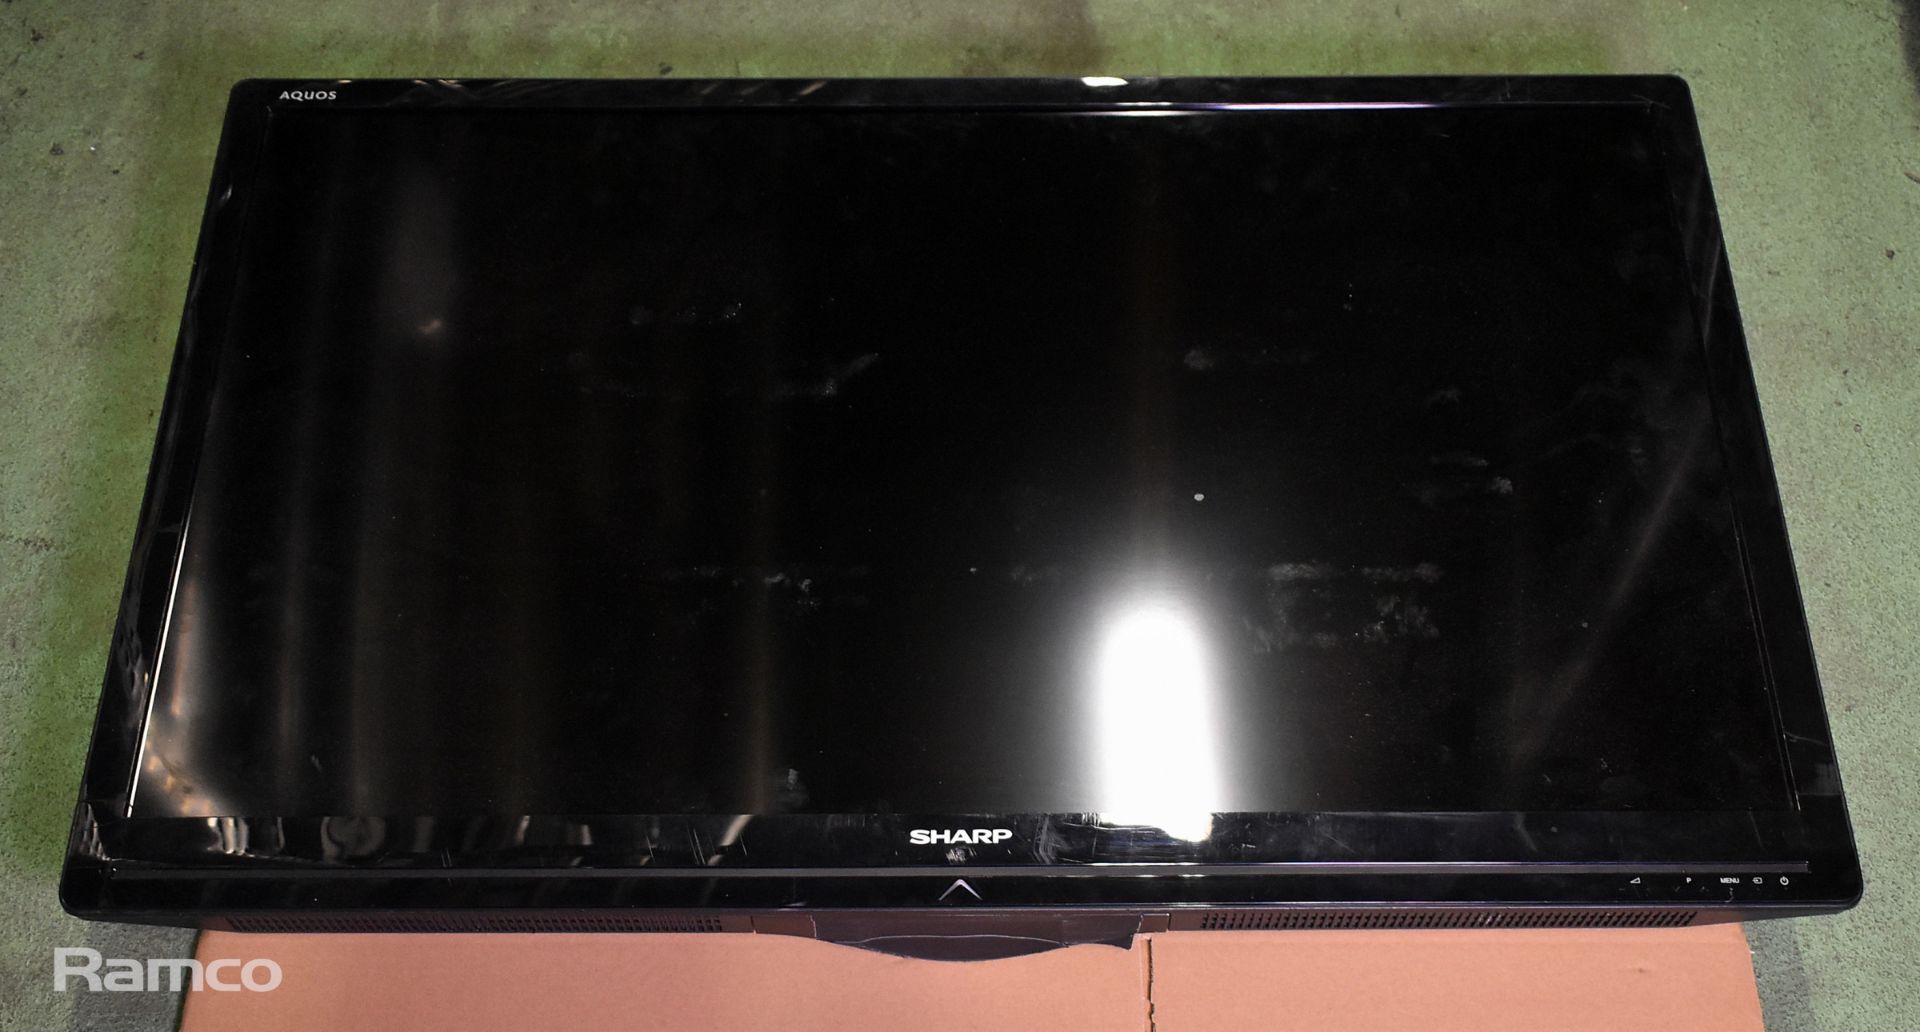 Sharp Aquos LC-42LE40E 42" LCD colour TV with mounting bracket